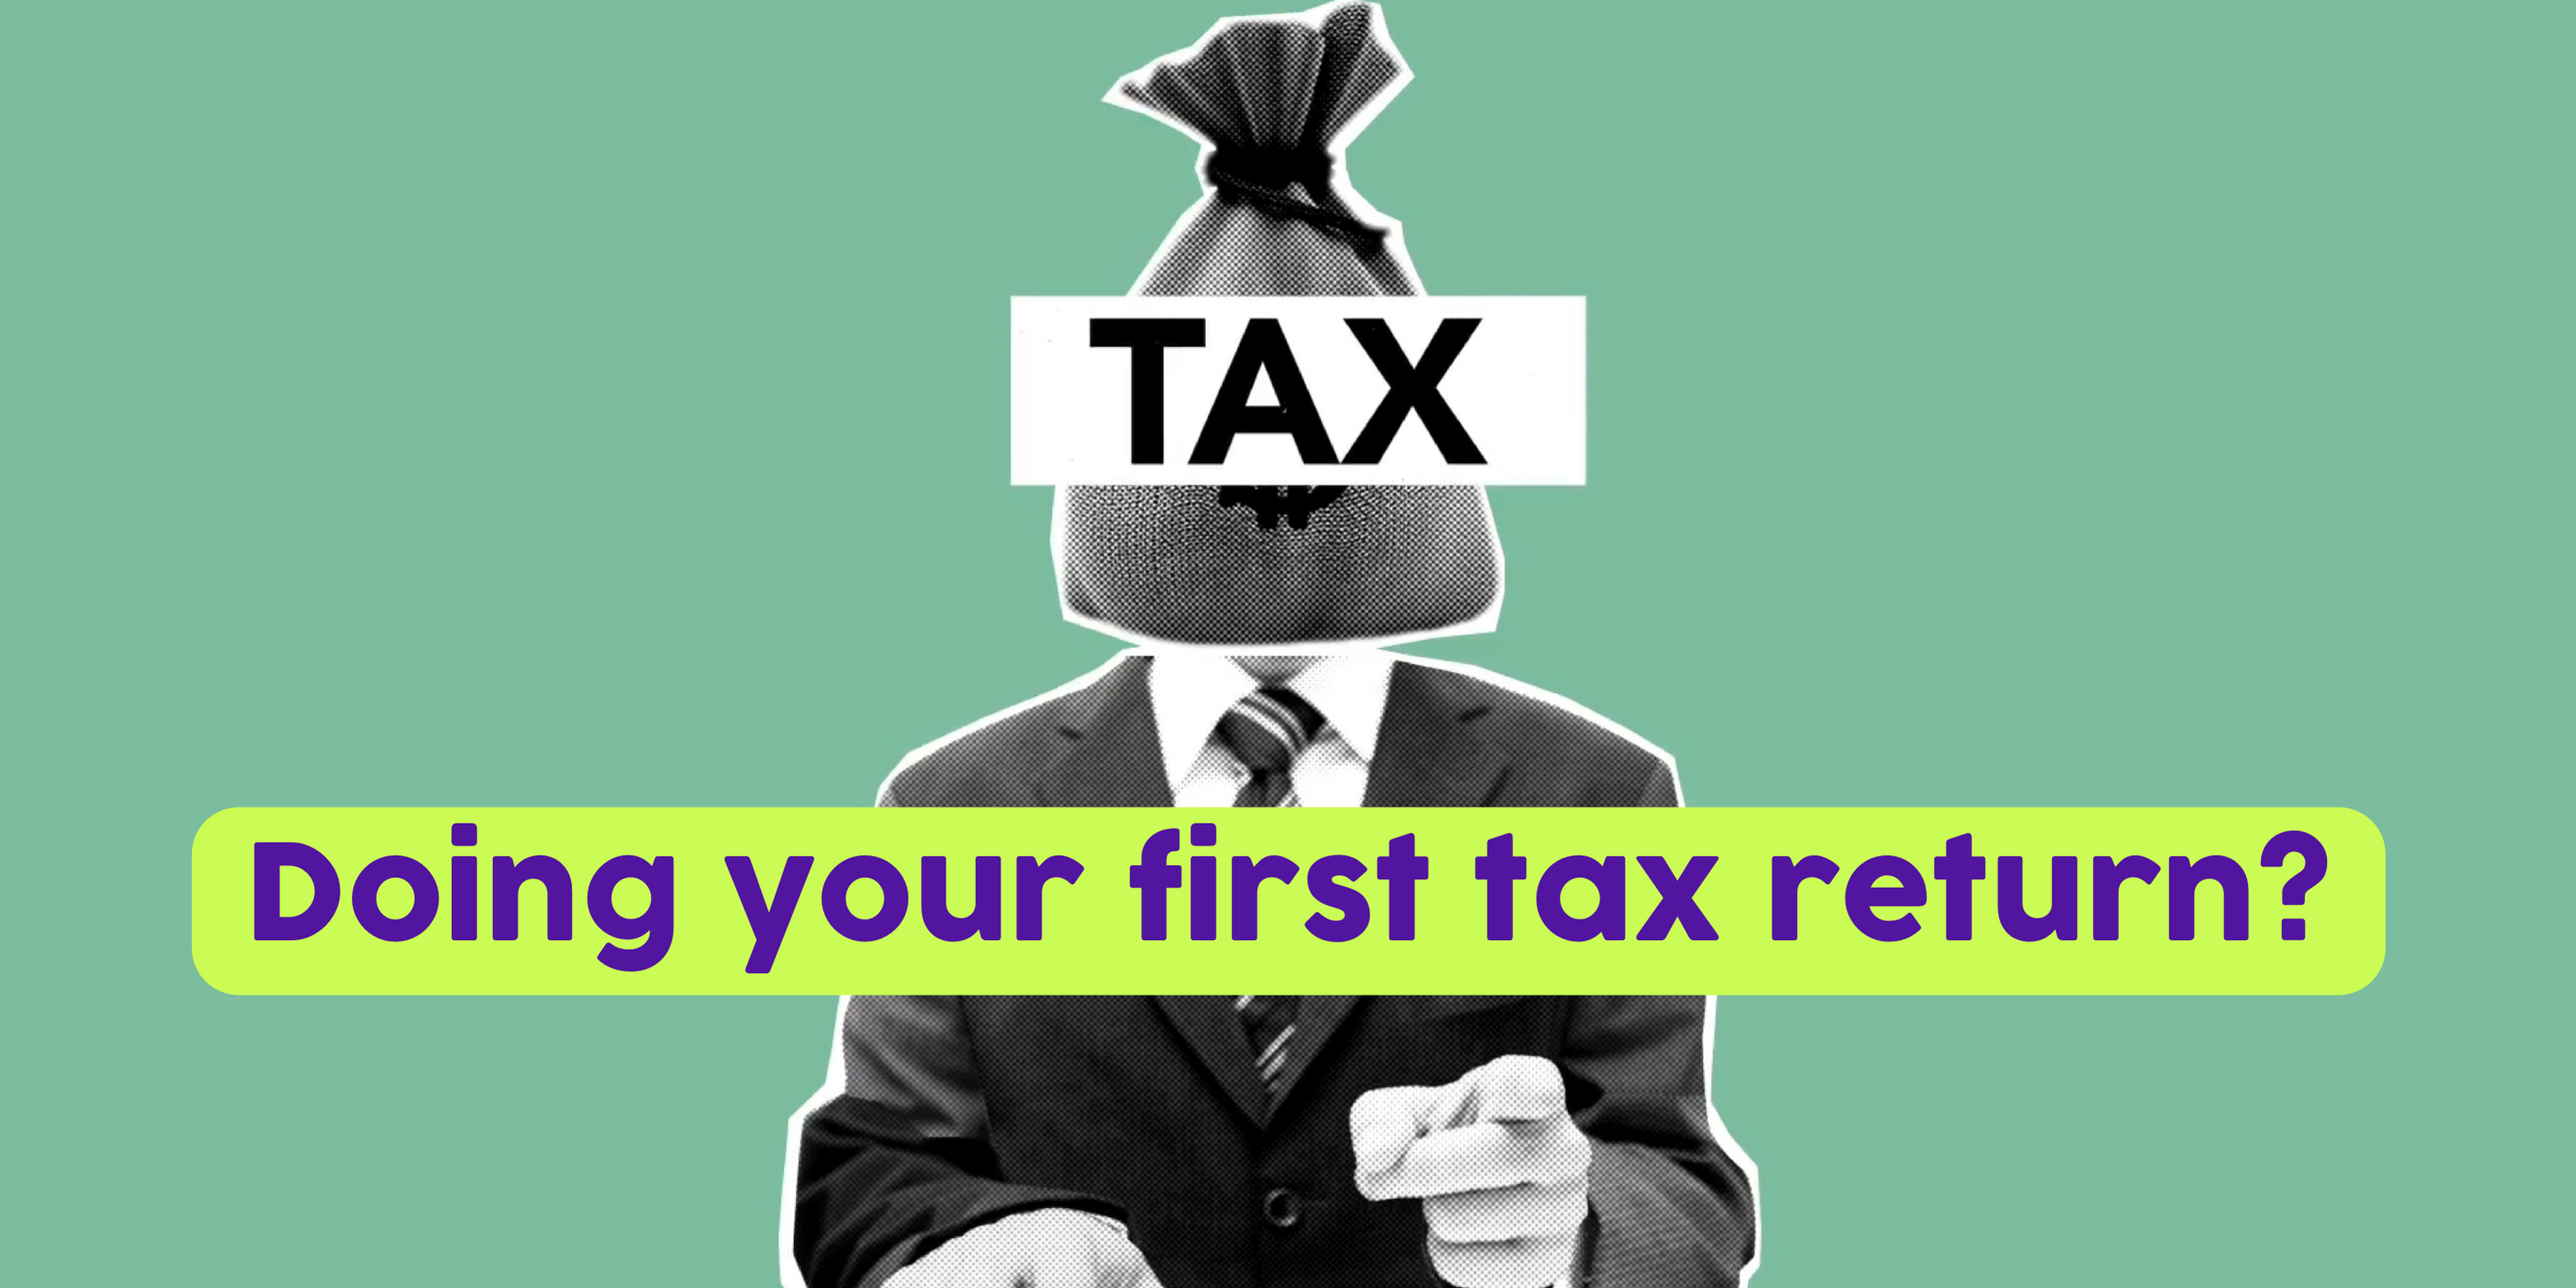 Doing your first tax return? Here’s everything you need to know